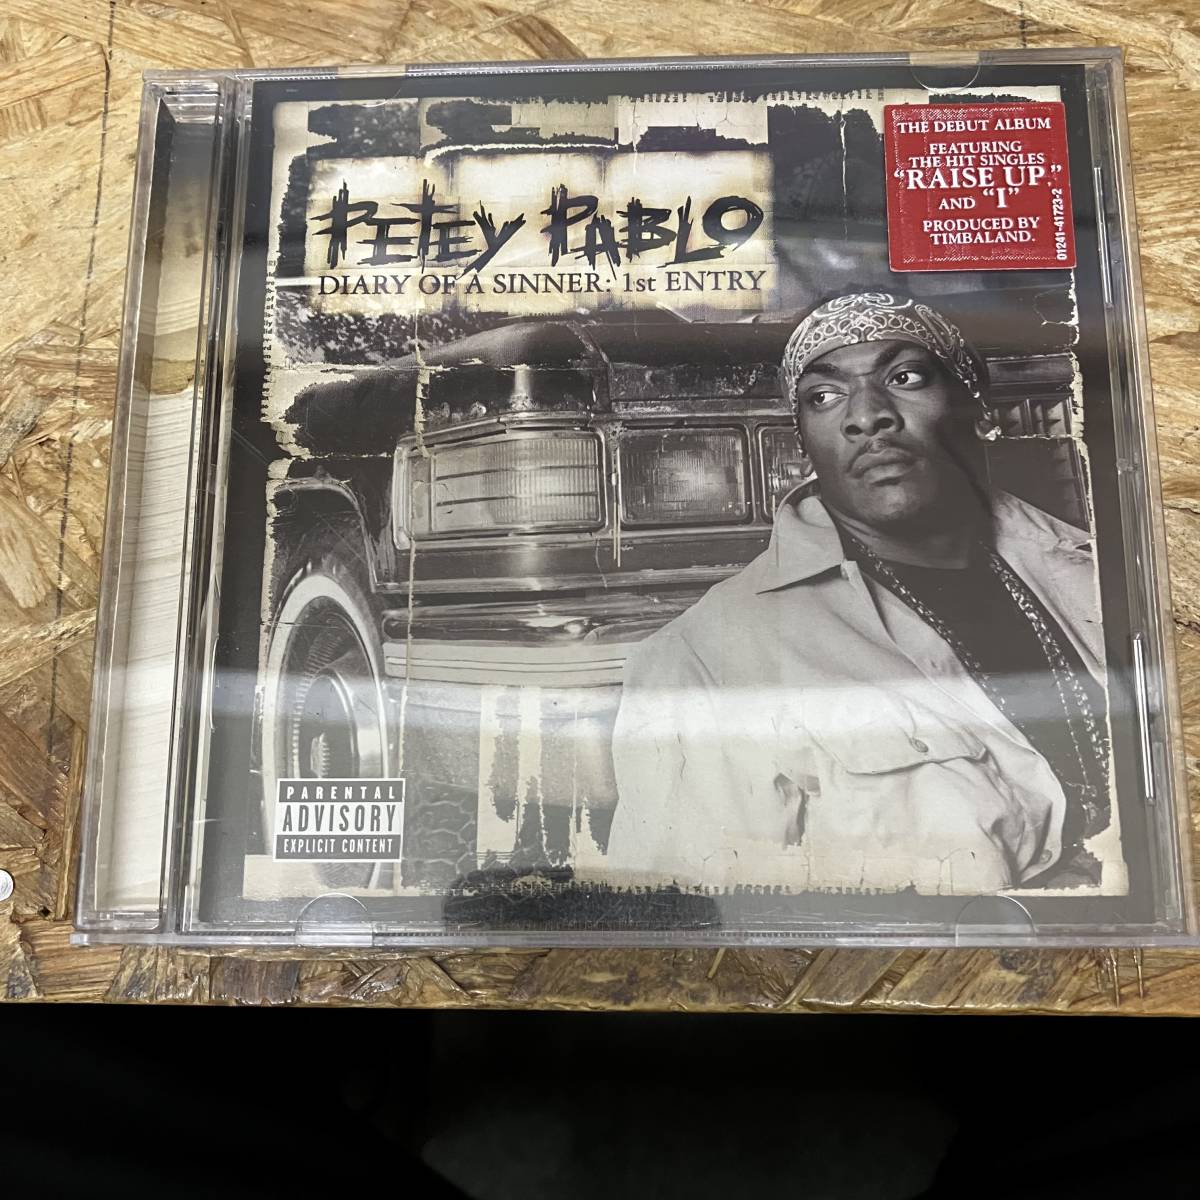 ● HIPHOP,R&B PETEY PABLO - DIARY OF A SINNER: 1ST ENTRY アルバム,名作! CD 中古品_画像1